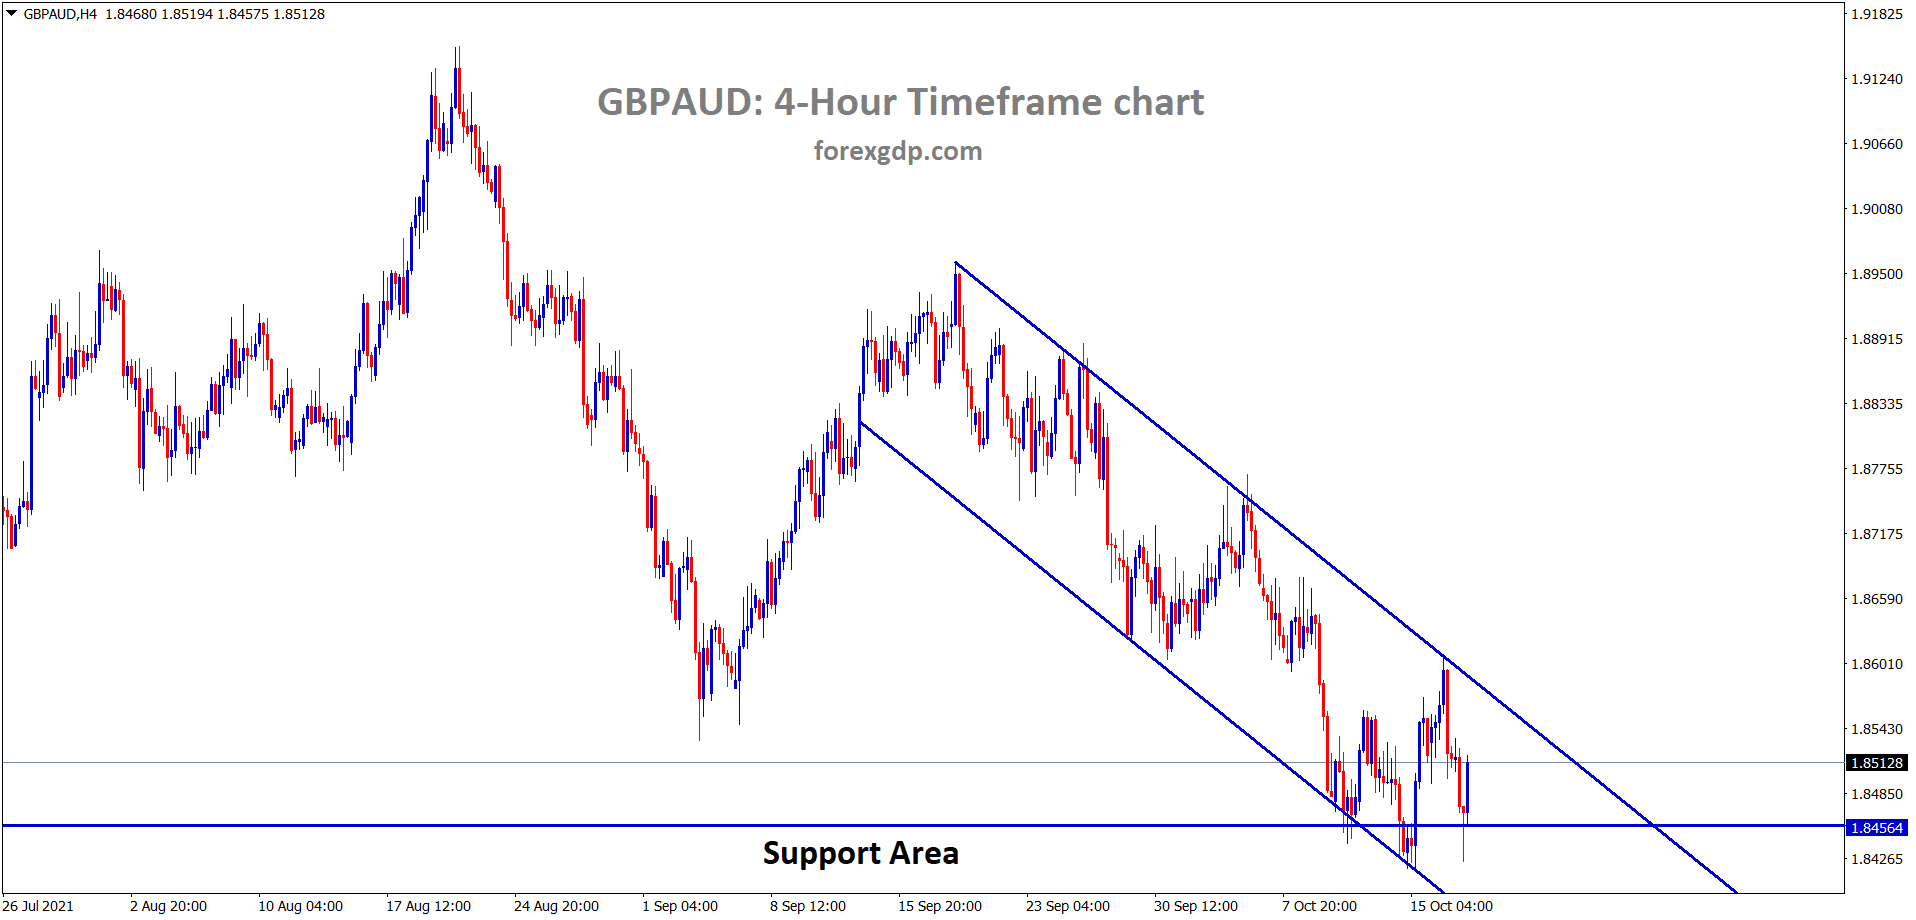 GBPAUD is rebounding hardly from the horizontal support area wait for the breakout from this descending channel